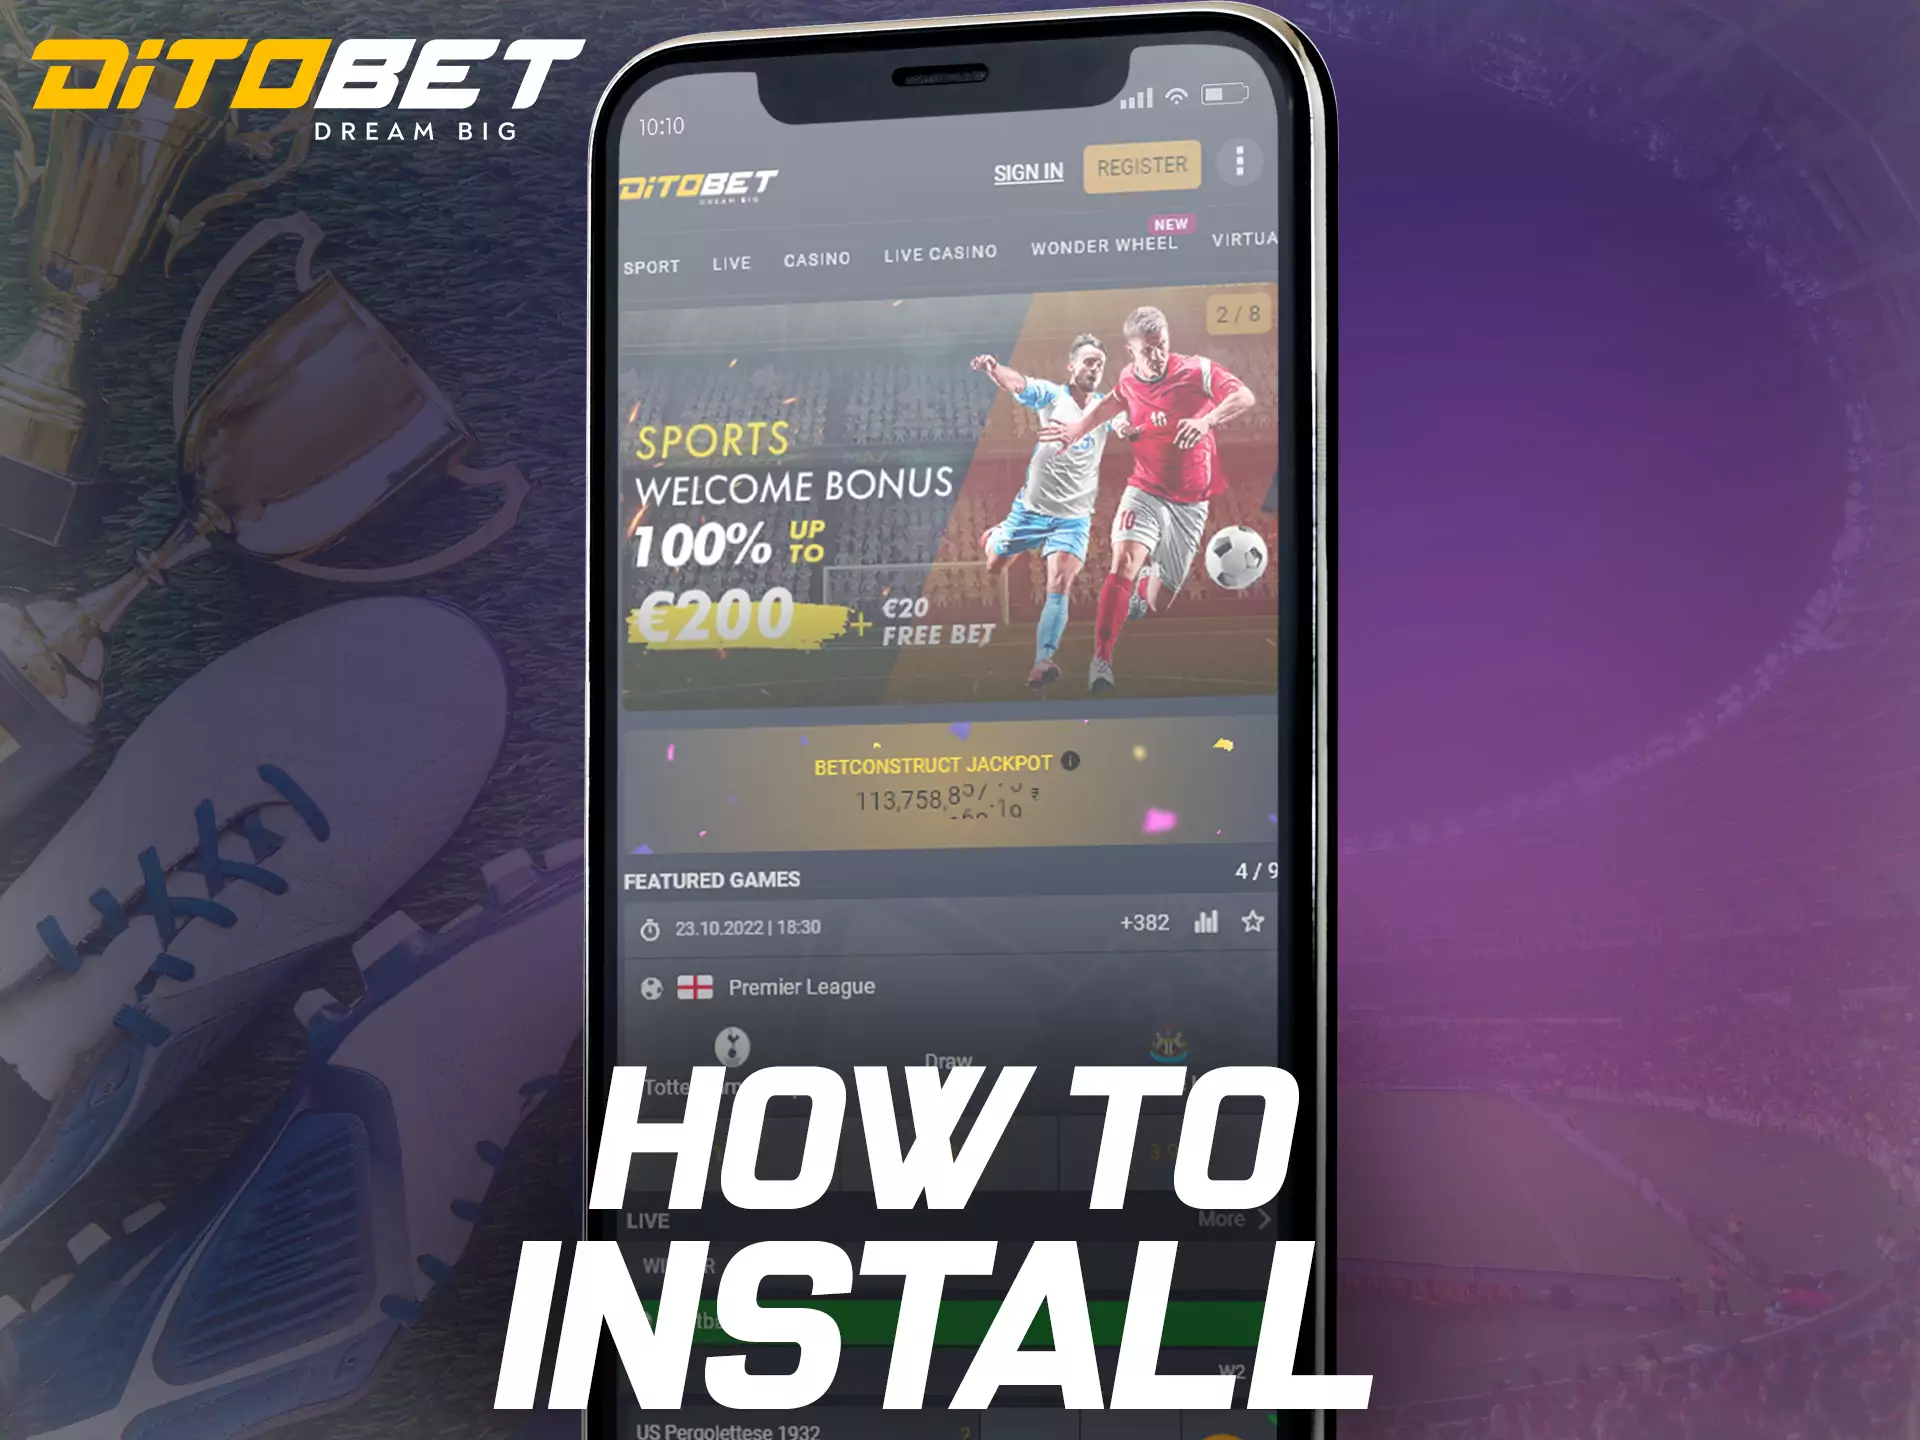 Follow the instructions and install the Ditobet app on your device.